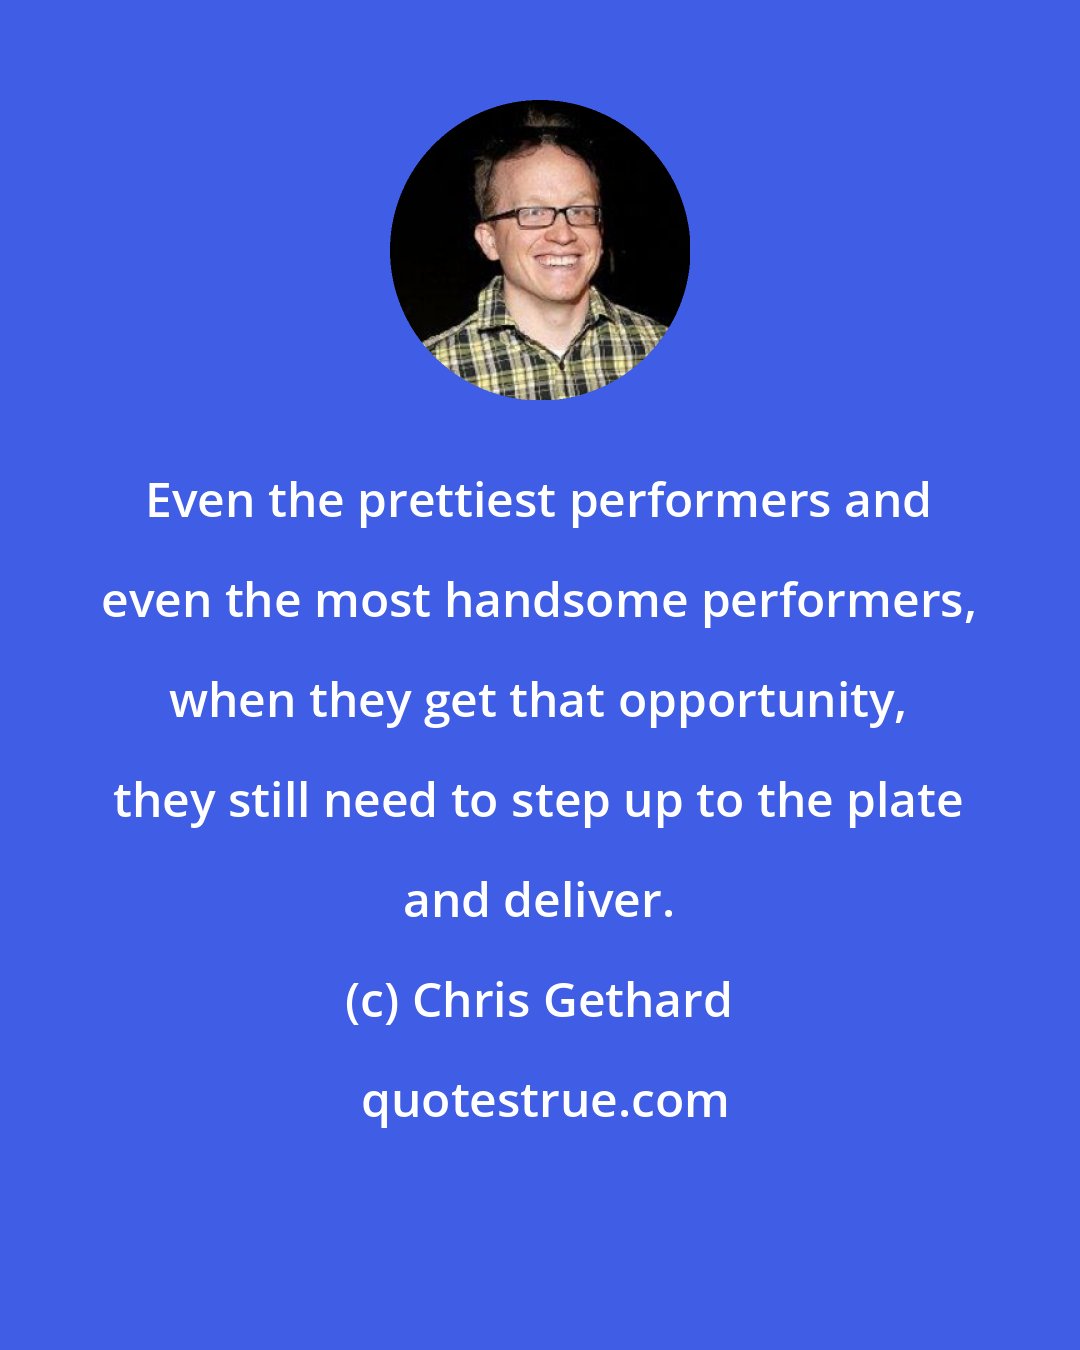 Chris Gethard: Even the prettiest performers and even the most handsome performers, when they get that opportunity, they still need to step up to the plate and deliver.